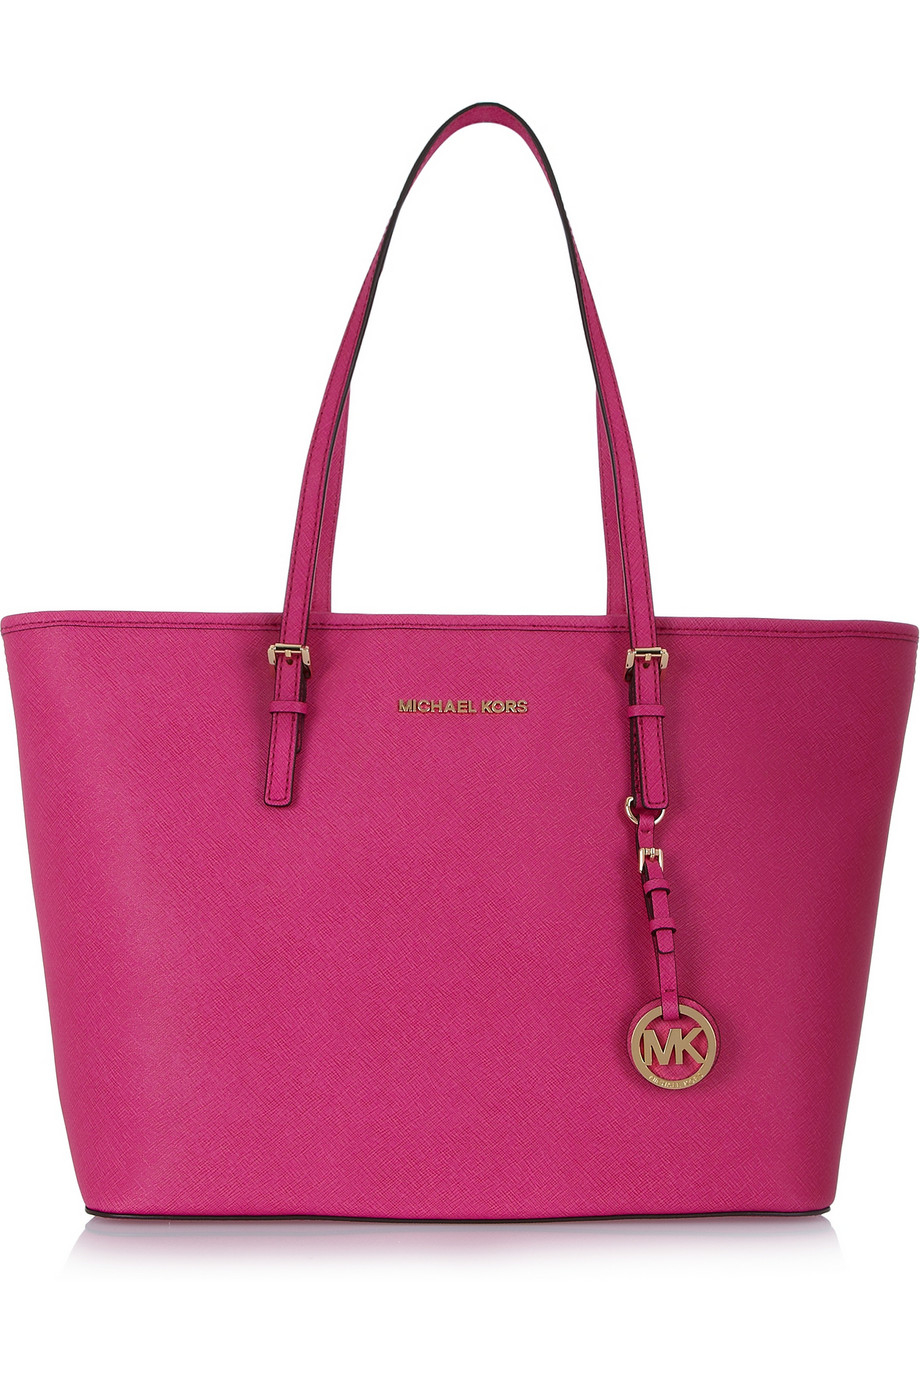 Michael Kors Soft Pink Saffiano Leather Multifunction Travel Tote Bag –  Design Her Boutique